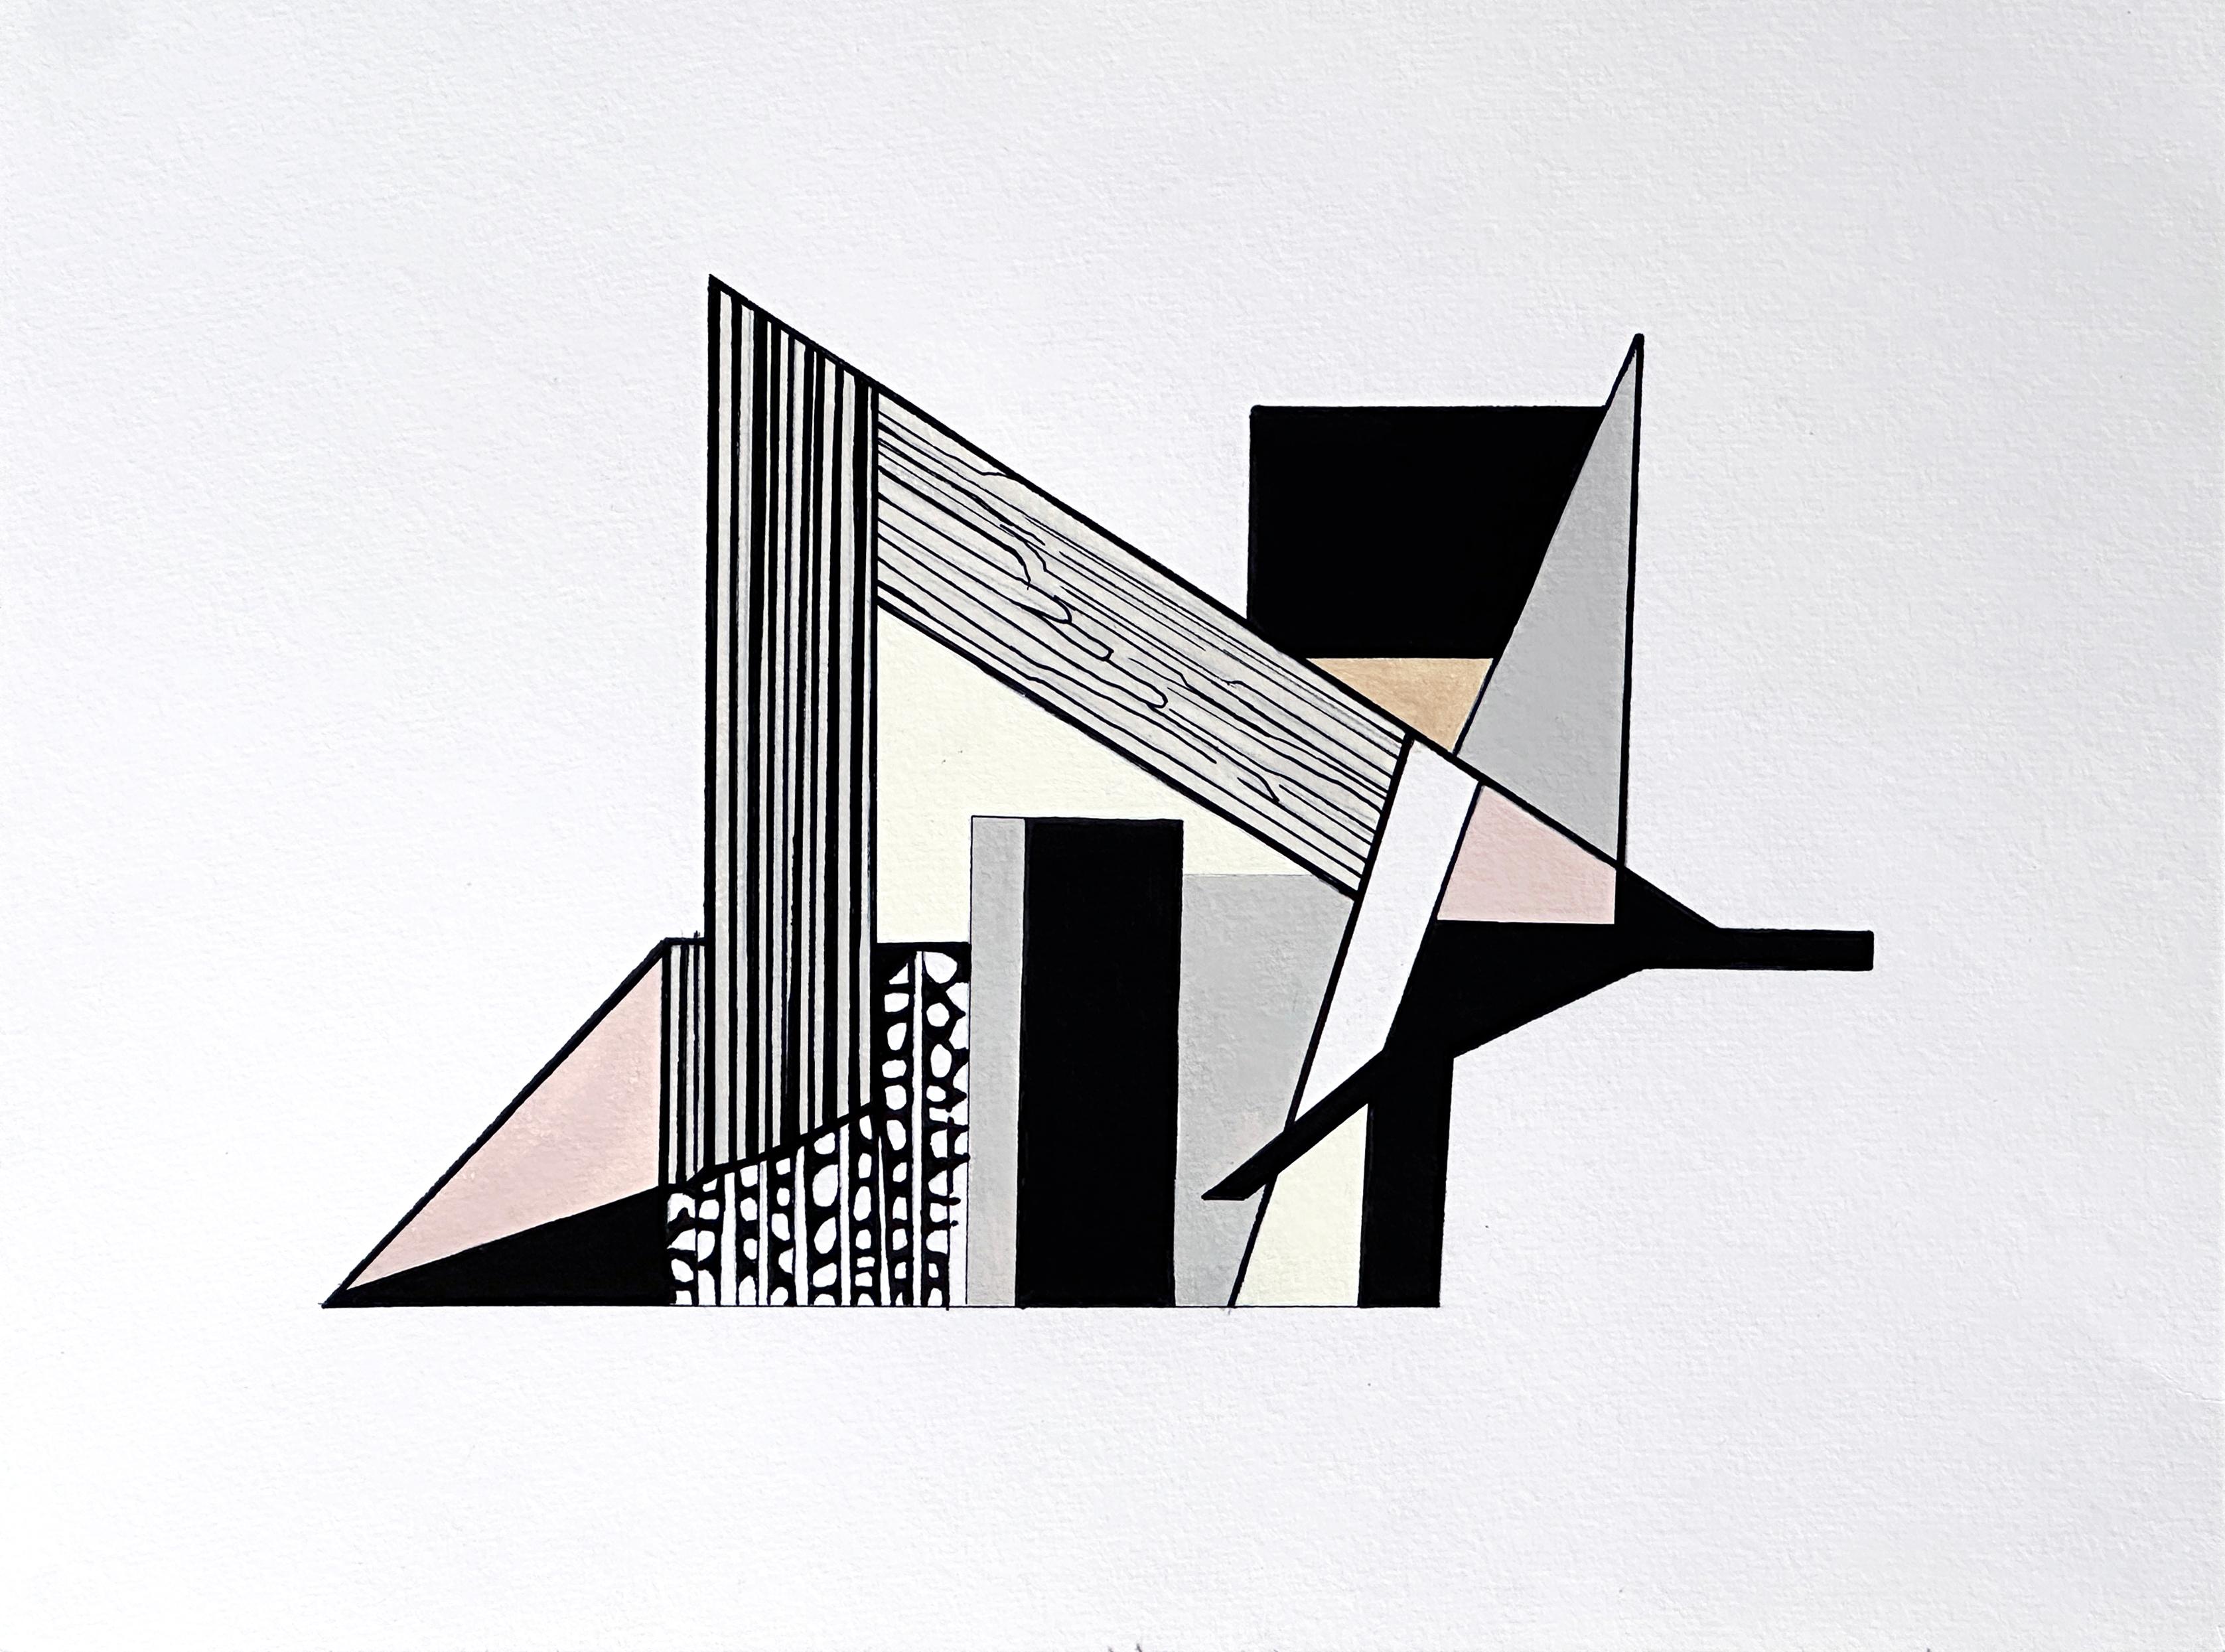 Amanda Andersen Abstract Painting - "Edifice V" contemporary drawing, abstract geometric, natural architecture